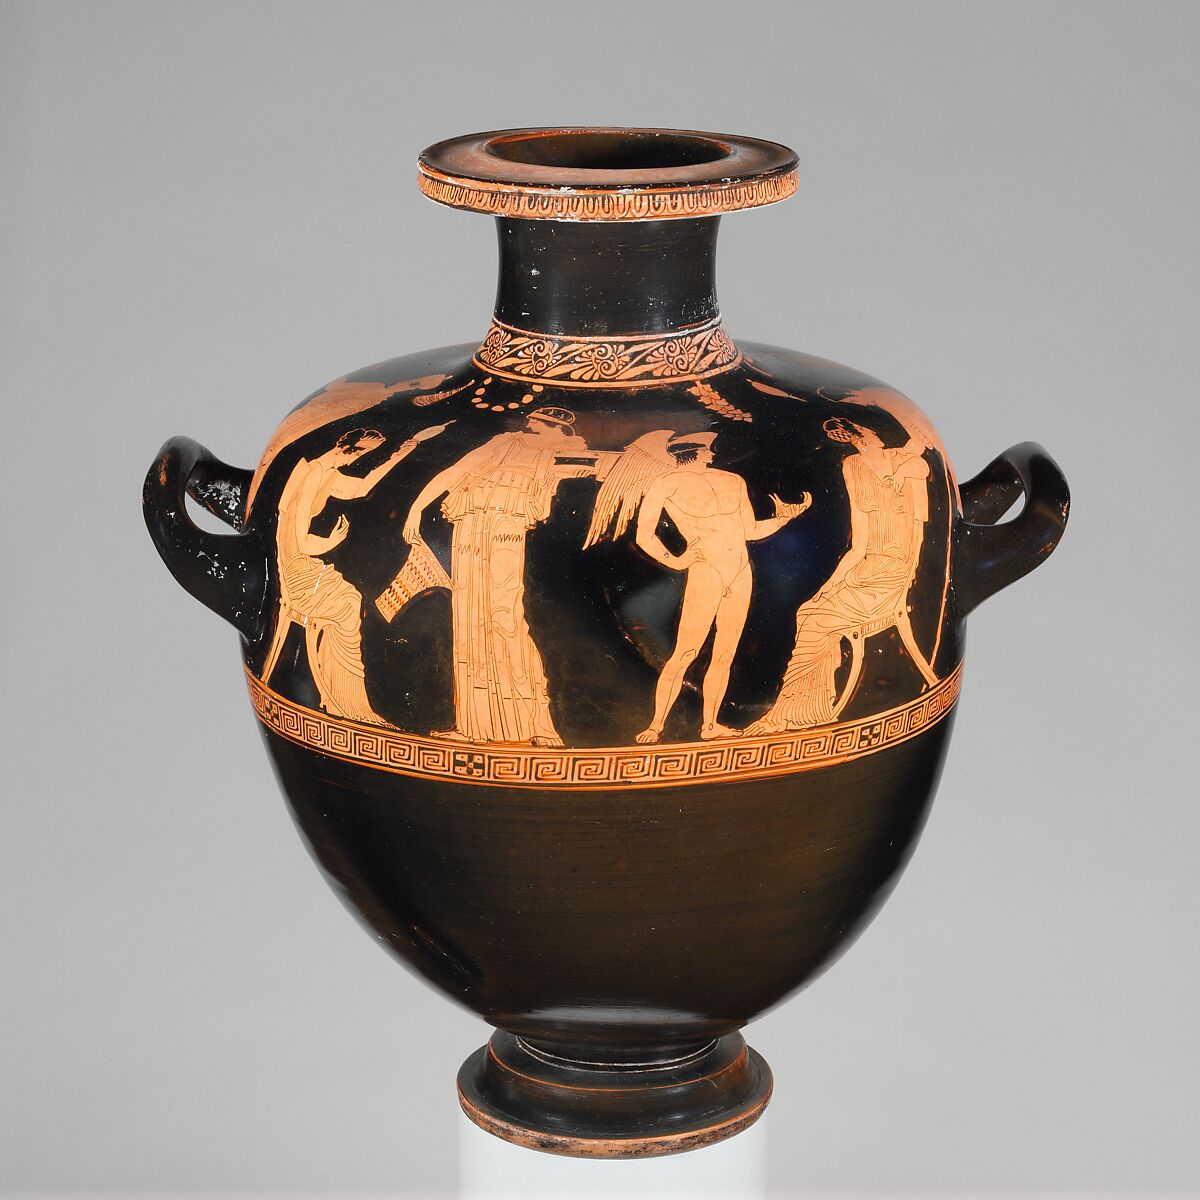 Terracotta hydria (water jar), Attributed to the Orpheus Painter, Terracotta, Greek, Attic 